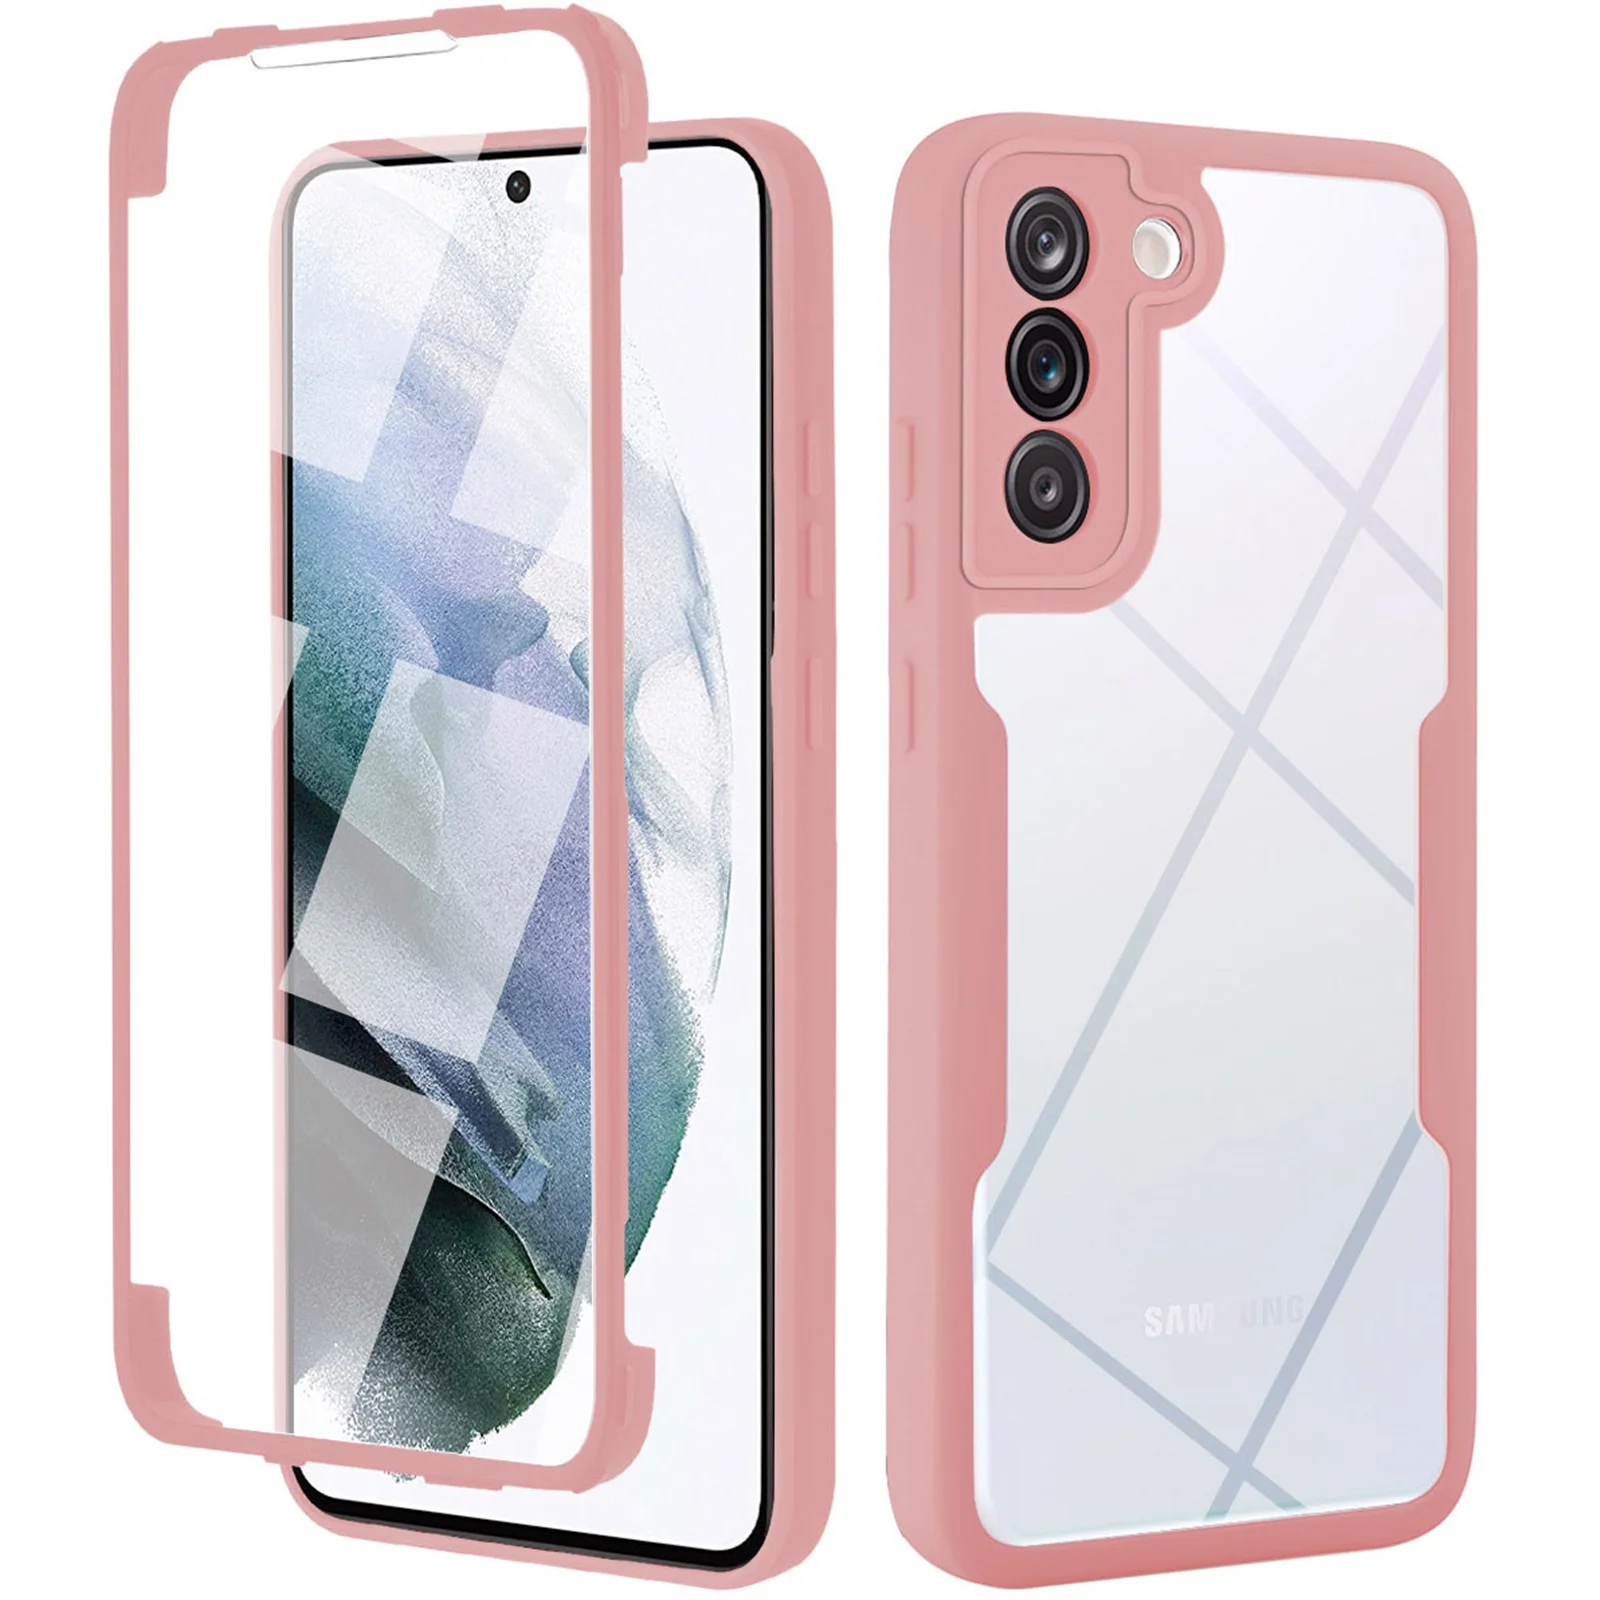 360 All Inclusive Case For Samsung S22 Ultra S21 Plus FE A72 A22 A12 A32 A52 A72 A82 A21S A51 A71 A13 A33 A53 Front+Back Cover kawaii phone case samsung